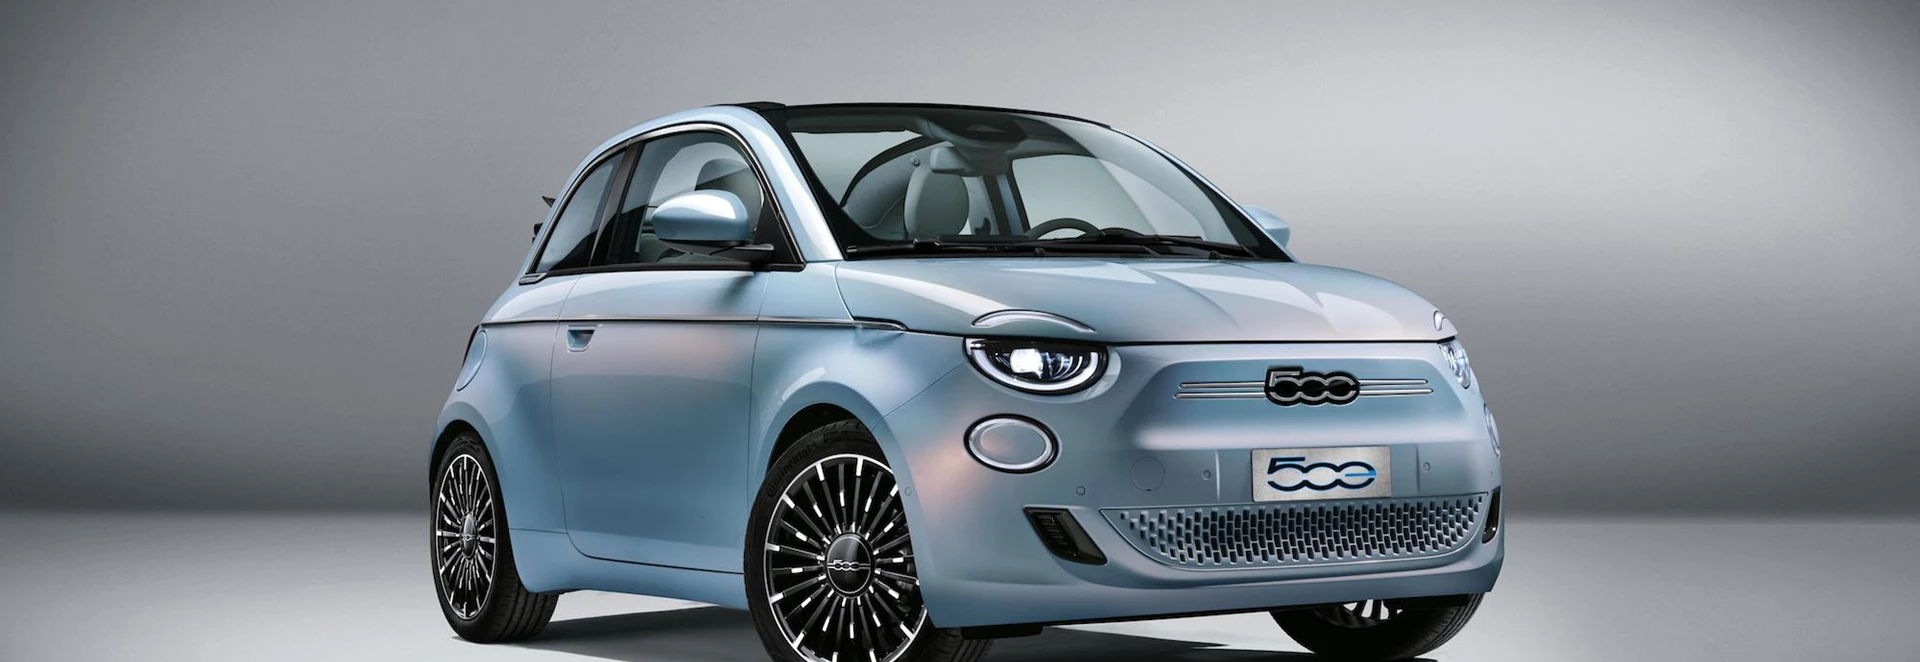 2020 Fiat 500 revealed as all-new electric car